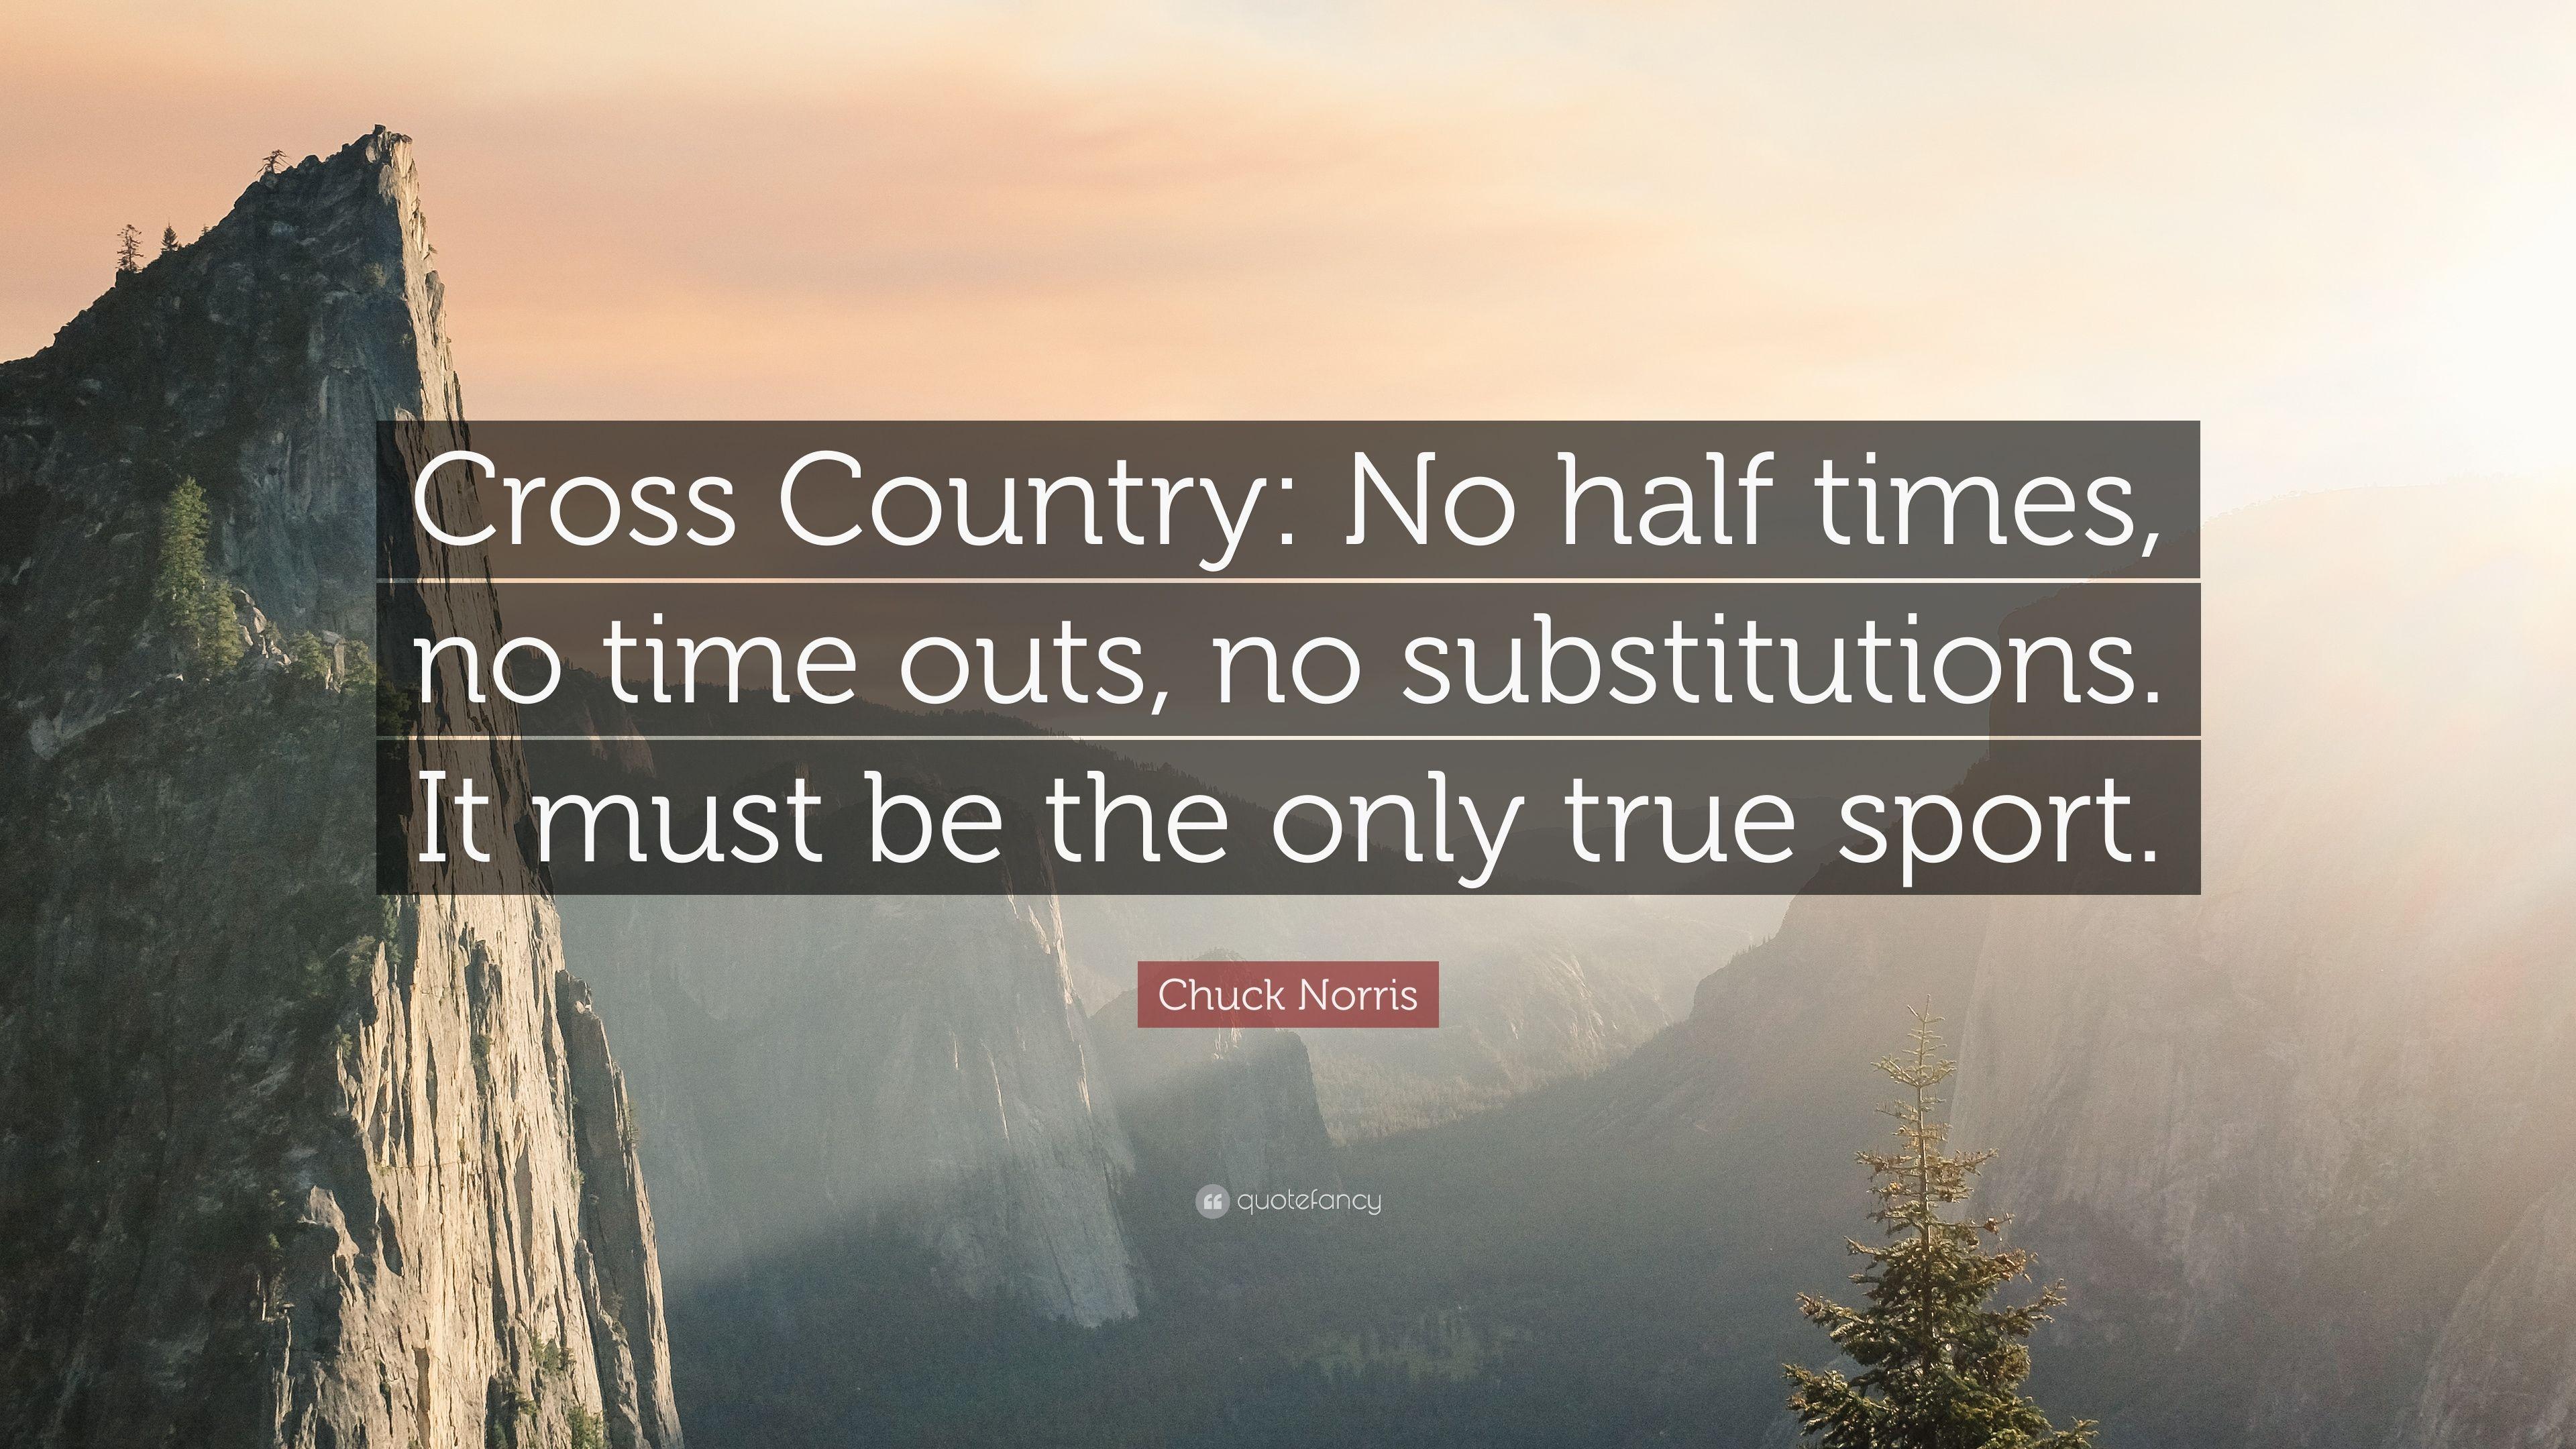 Chuck Norris Quote: “Cross Country: No half times, no time outs, no